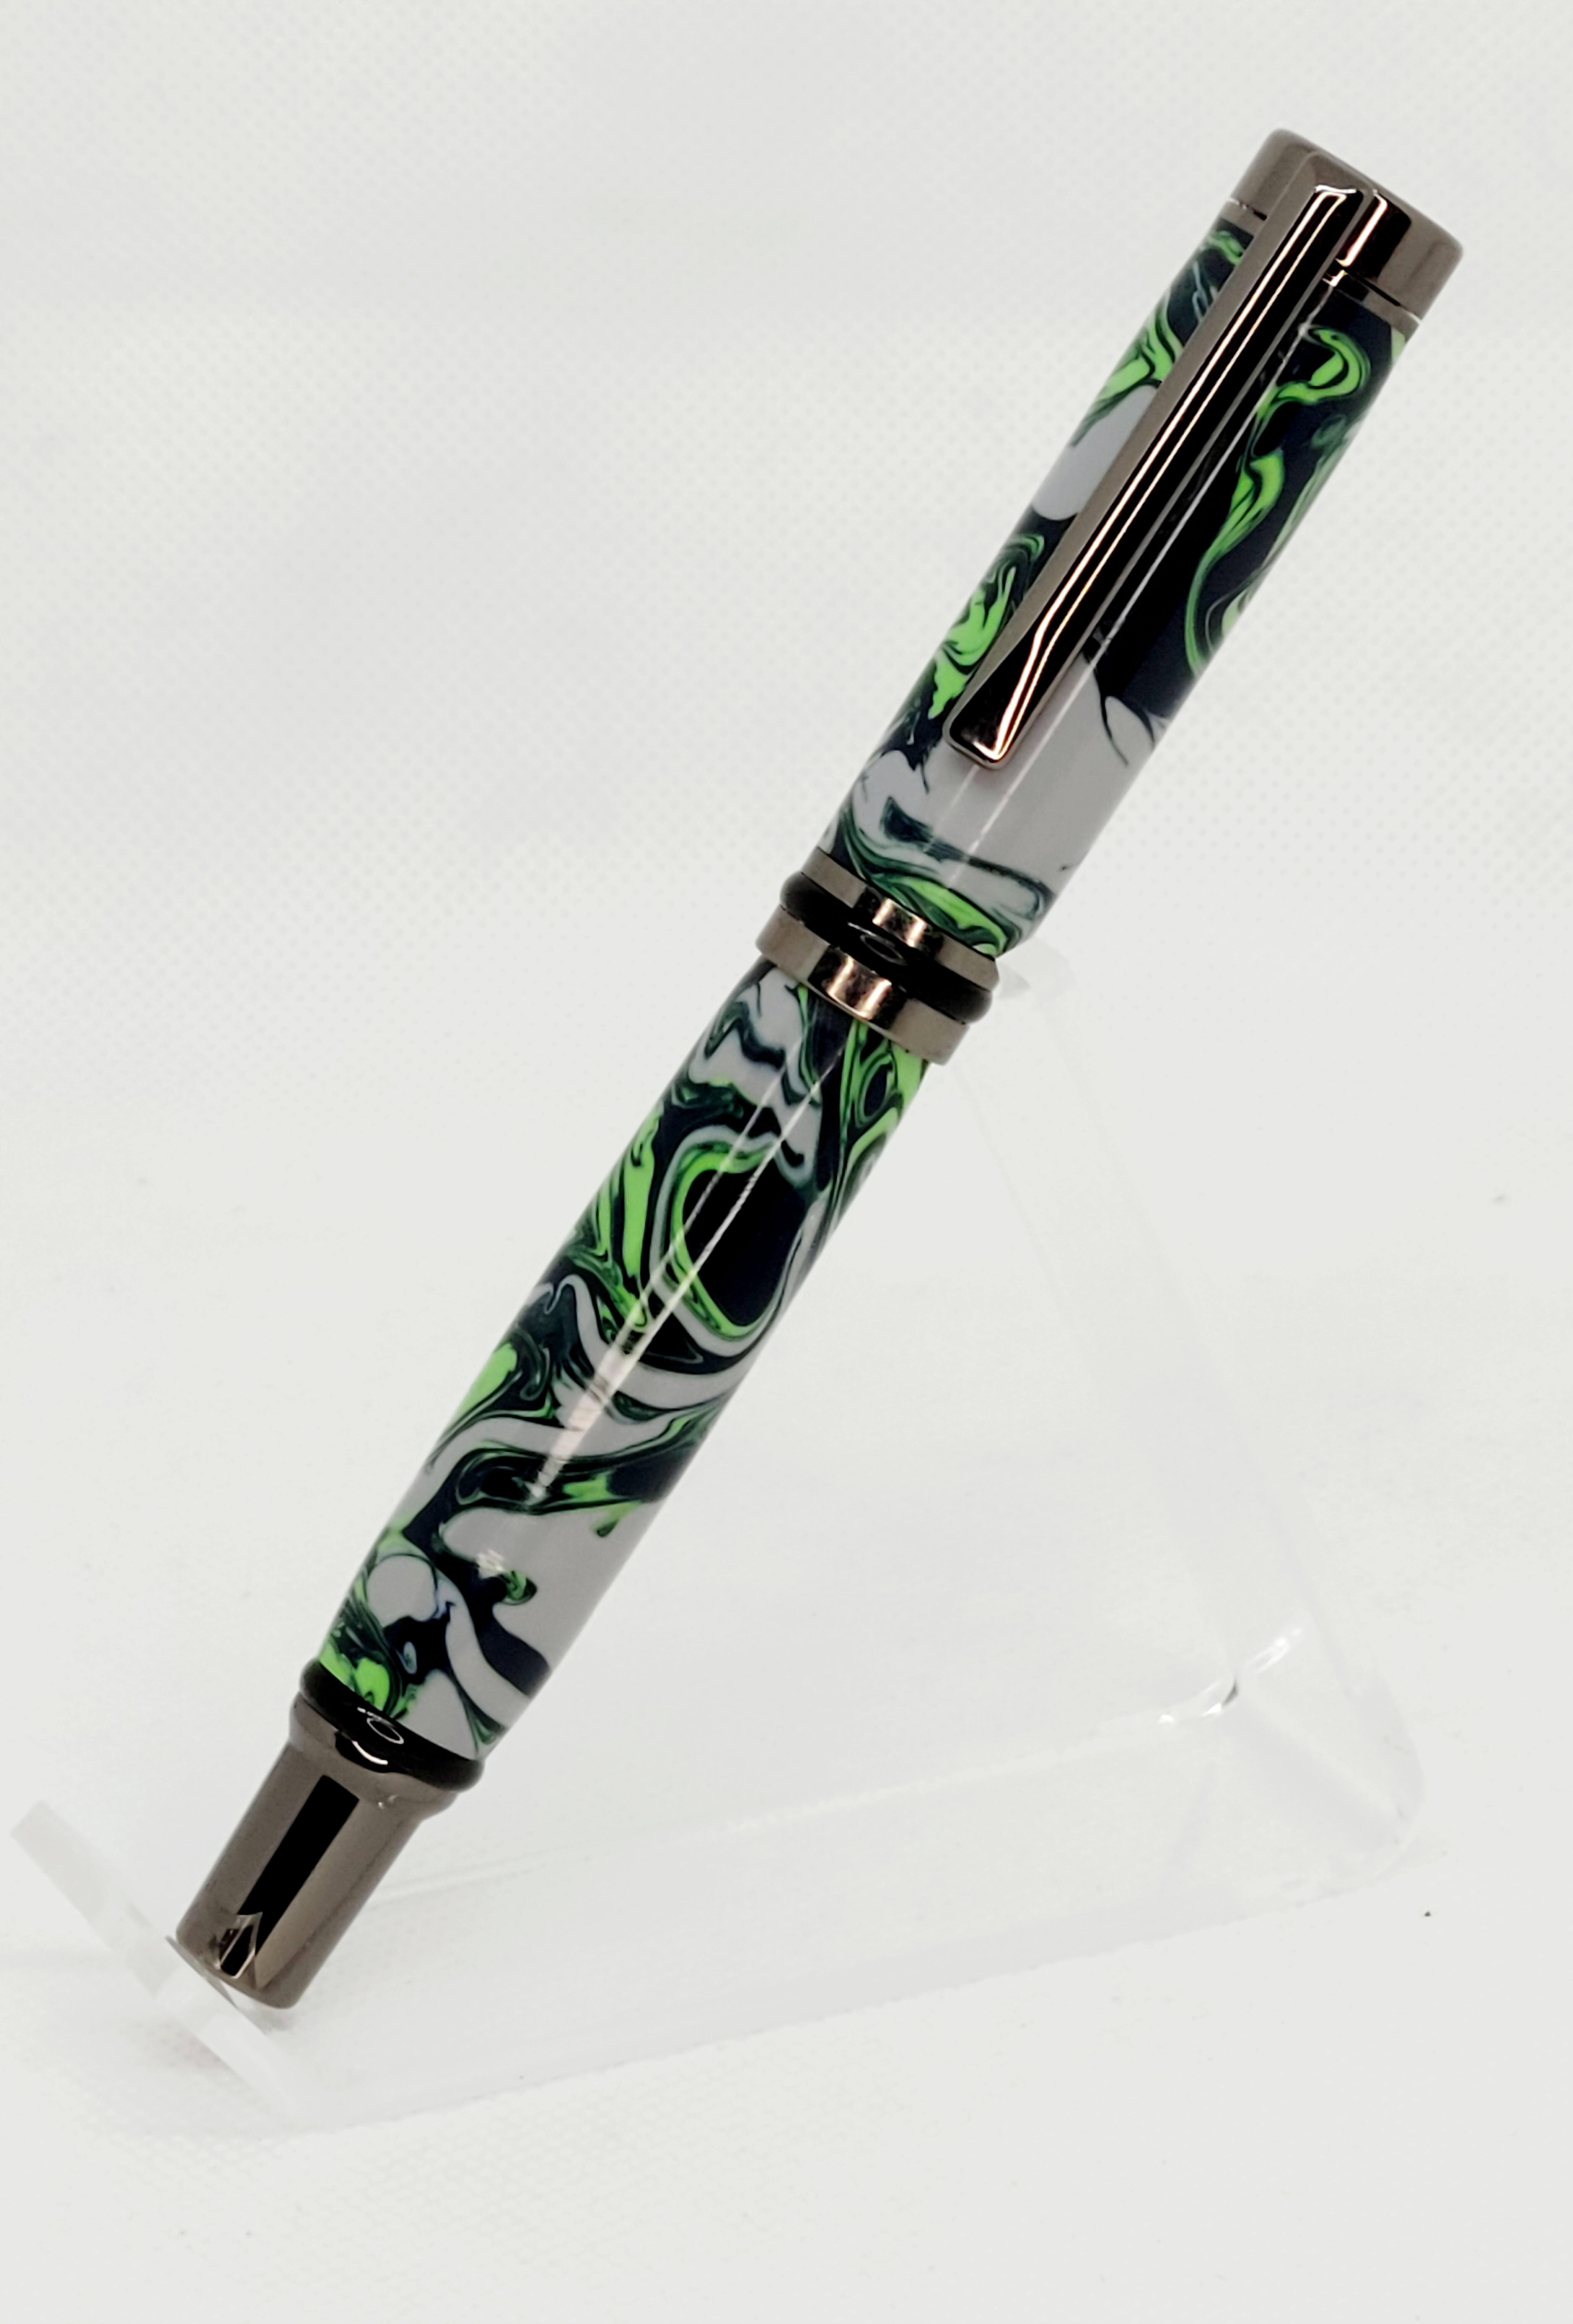 With its sleek, streamlined and elegant design, this fountain pen will make a gift of enduring beauty. This is perfect for those with smaller hands as it is slightly smaller than most rollerball and fountain pens.